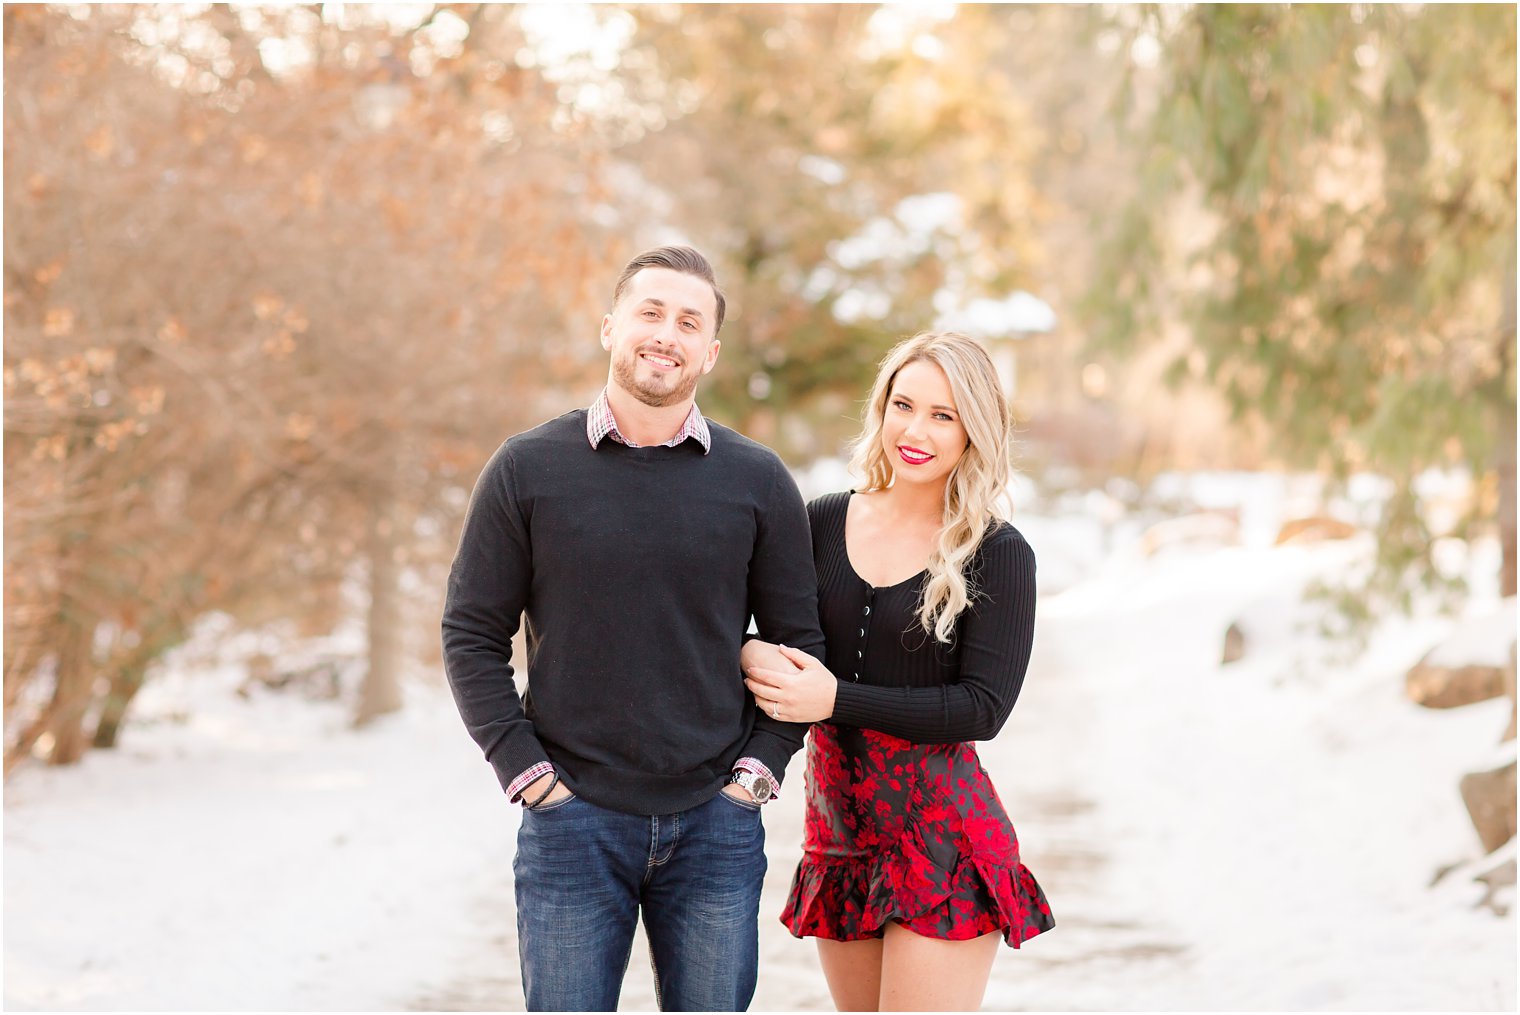 Engagement session with outfits in red and black